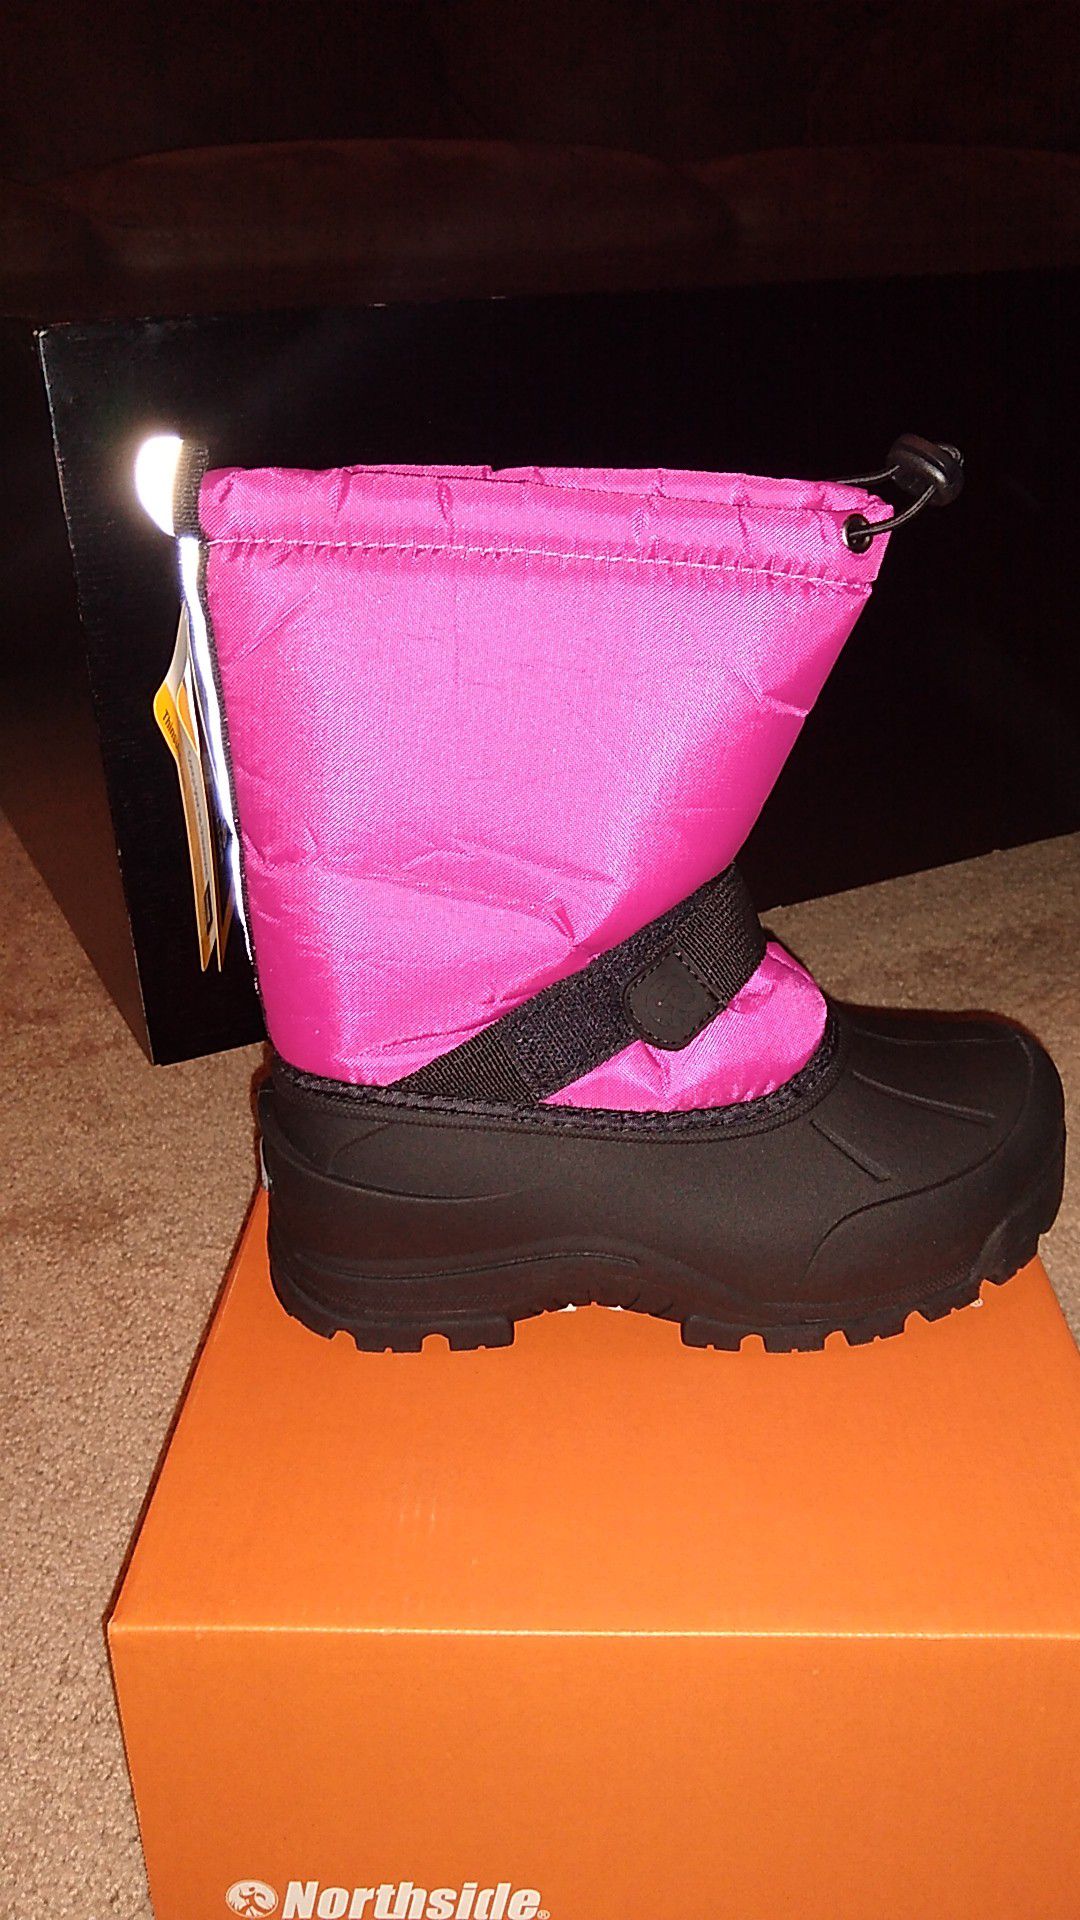 Kid's Size 3 Snow Boots - New In Box